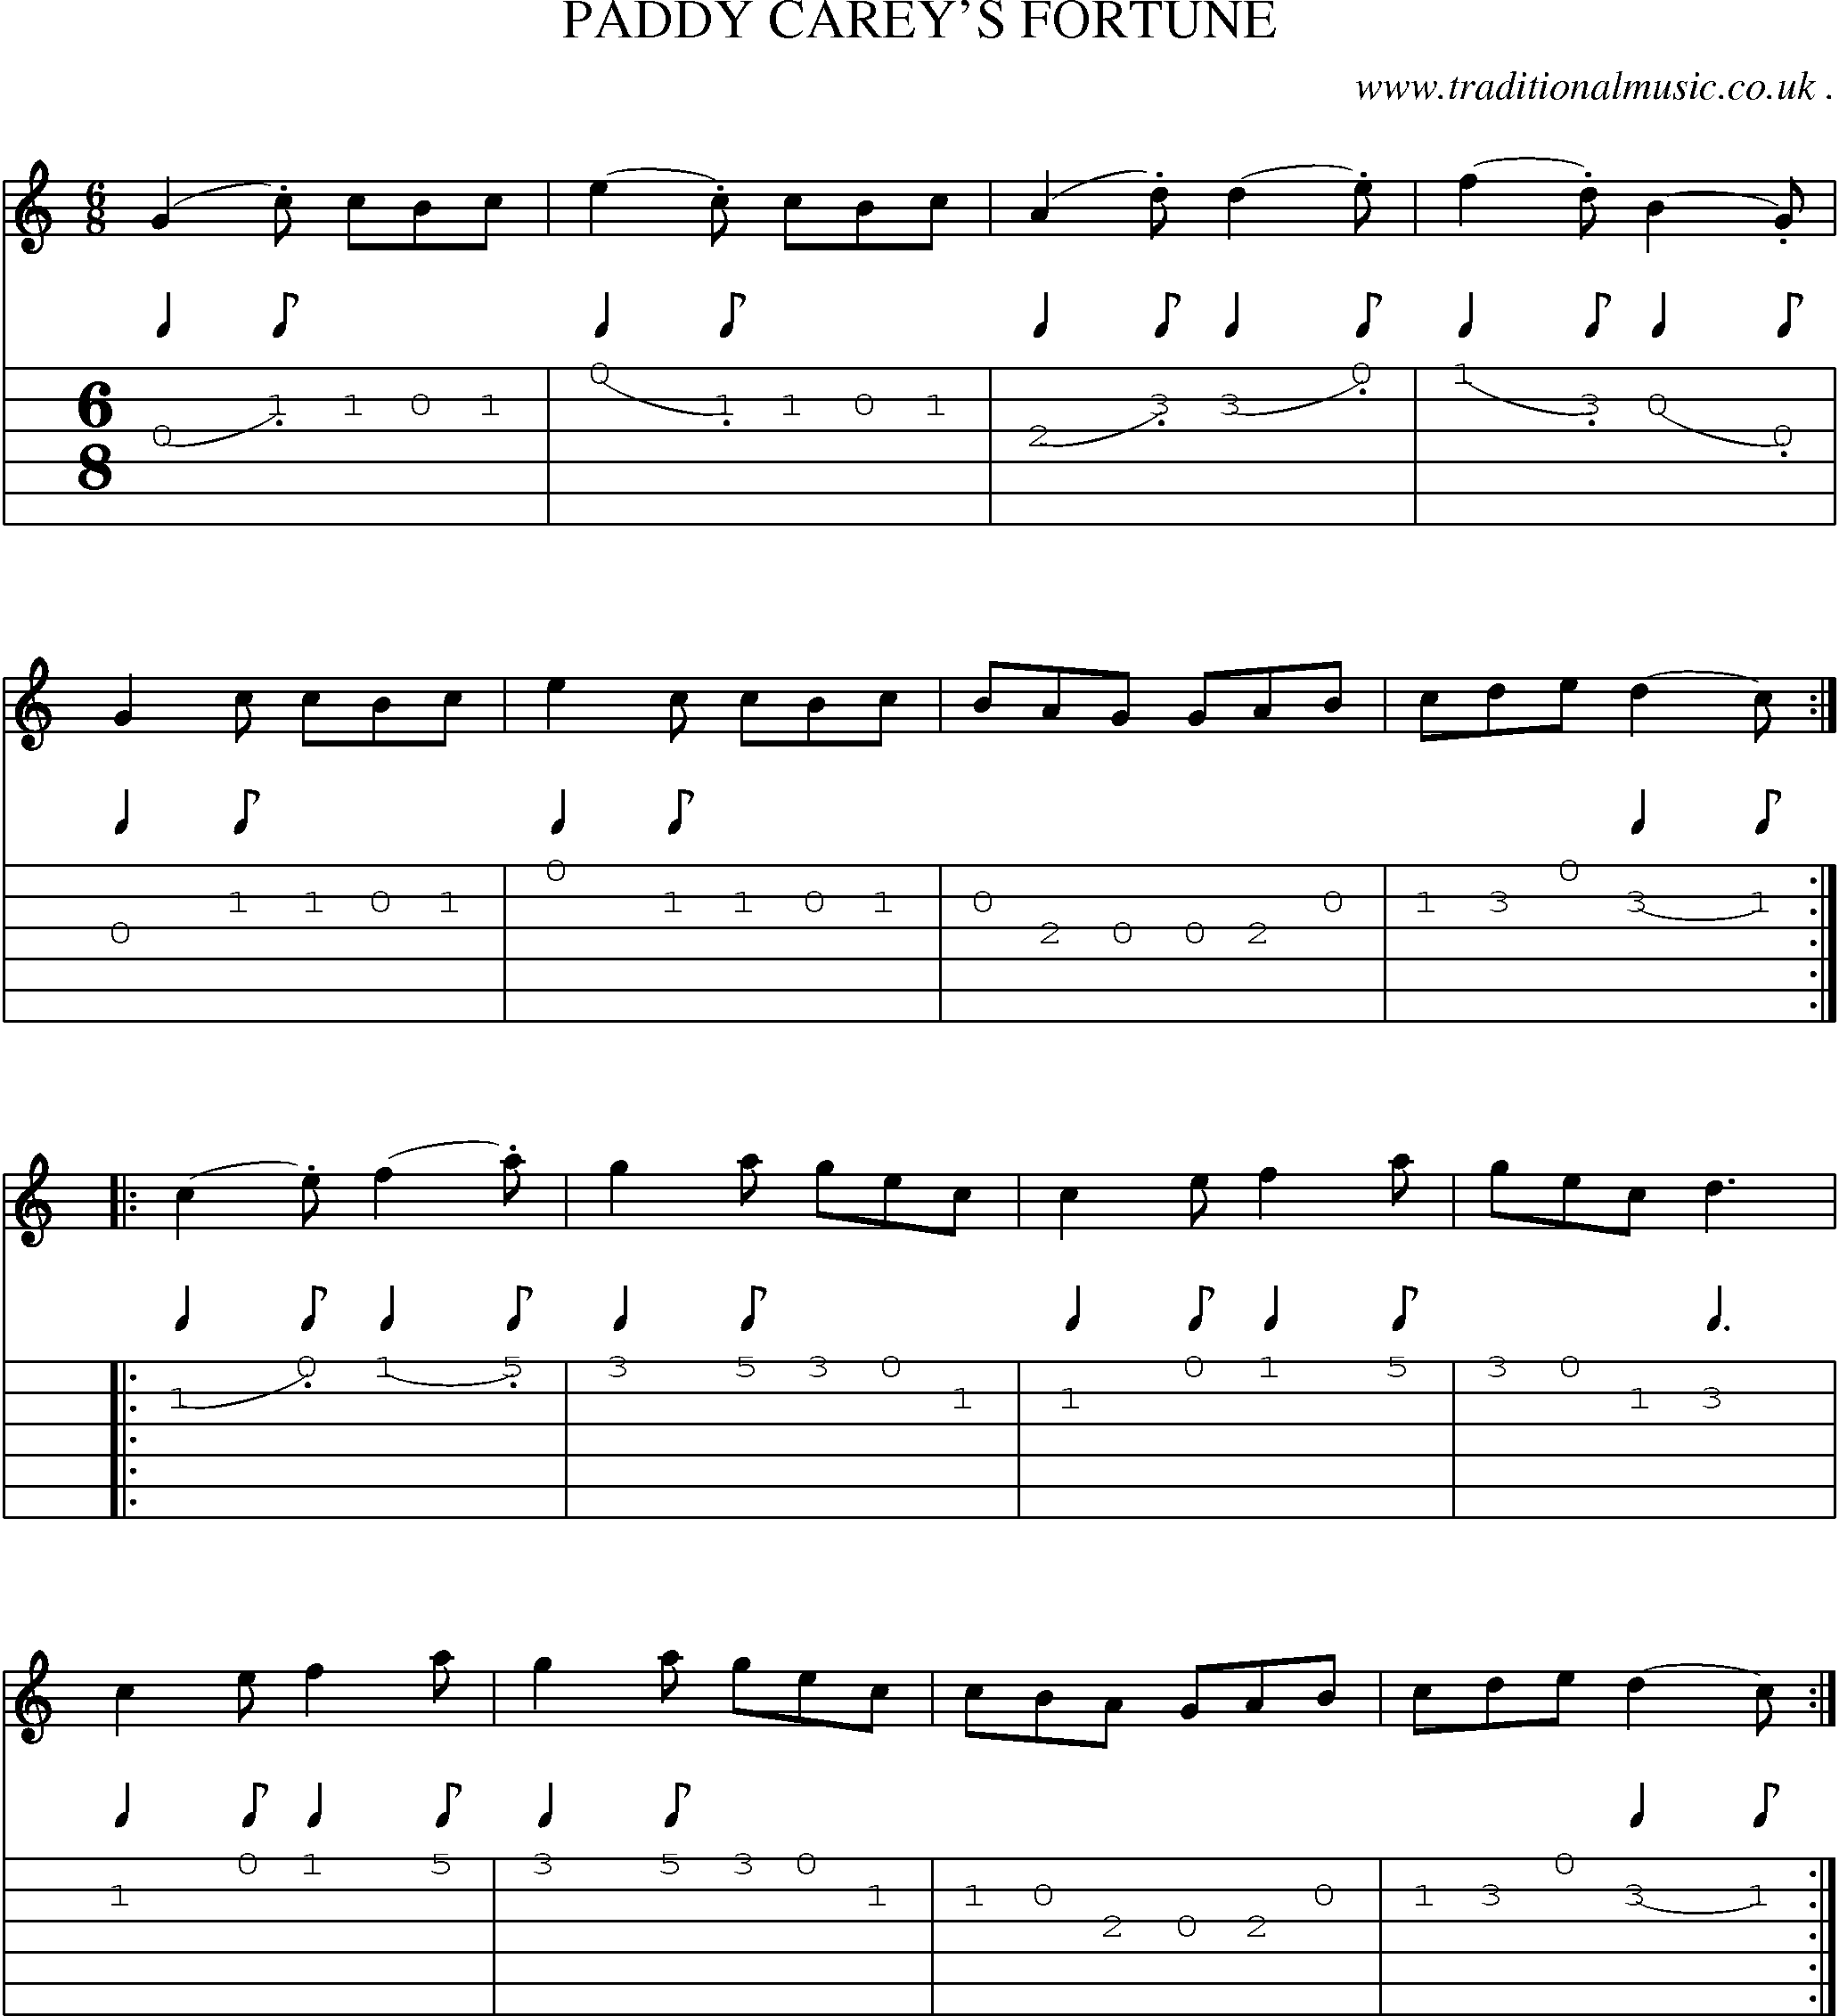 Sheet-Music and Guitar Tabs for Paddy Careys Fortune